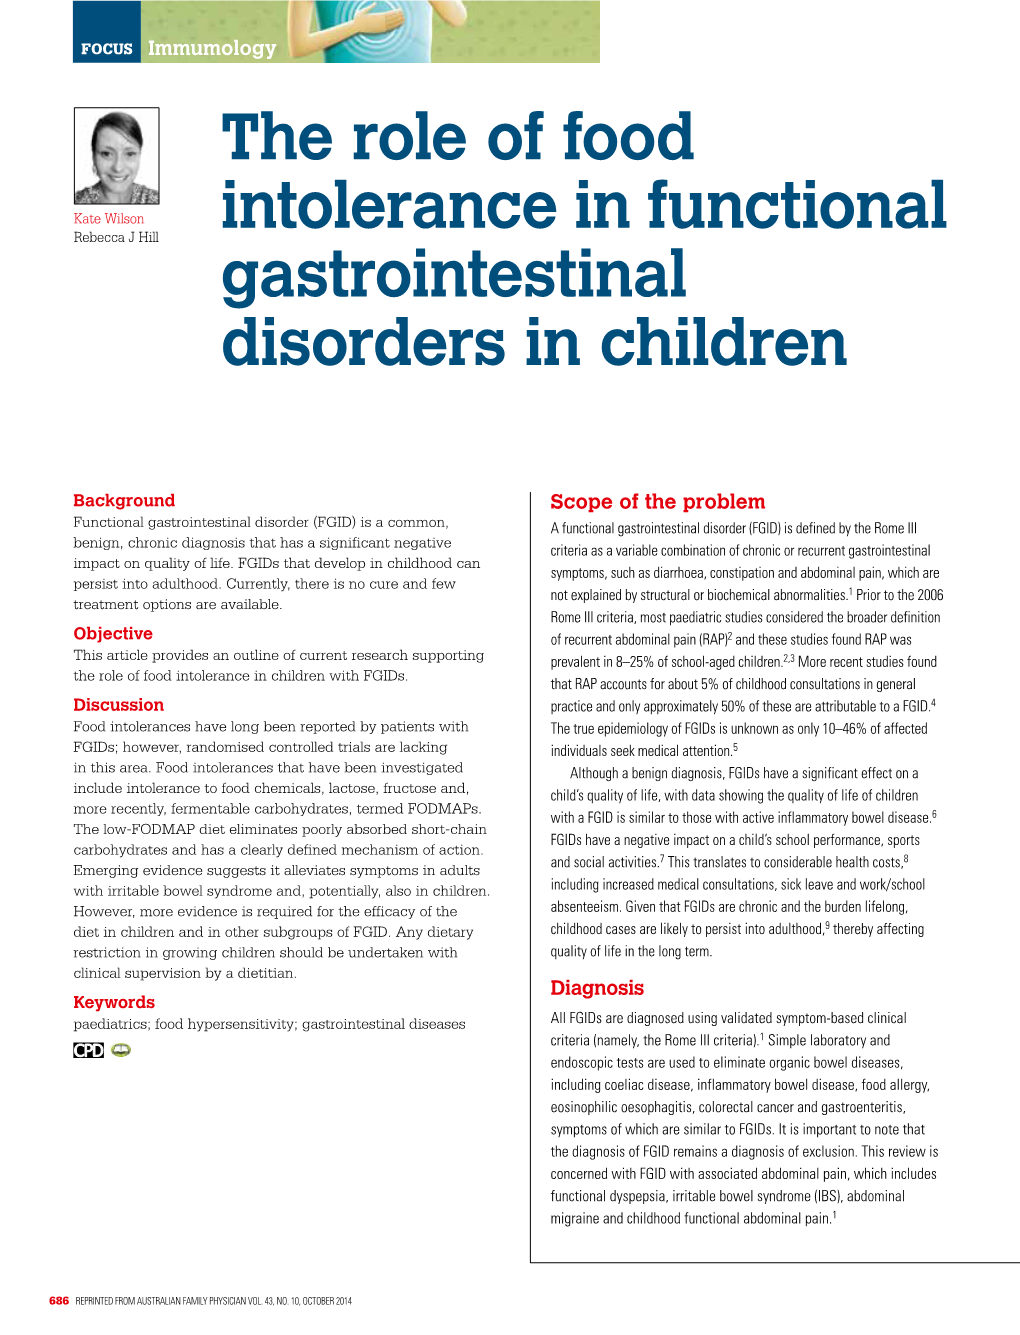 The Role of Food Intolerance in Functional Gastrointestinal Disorders in Children